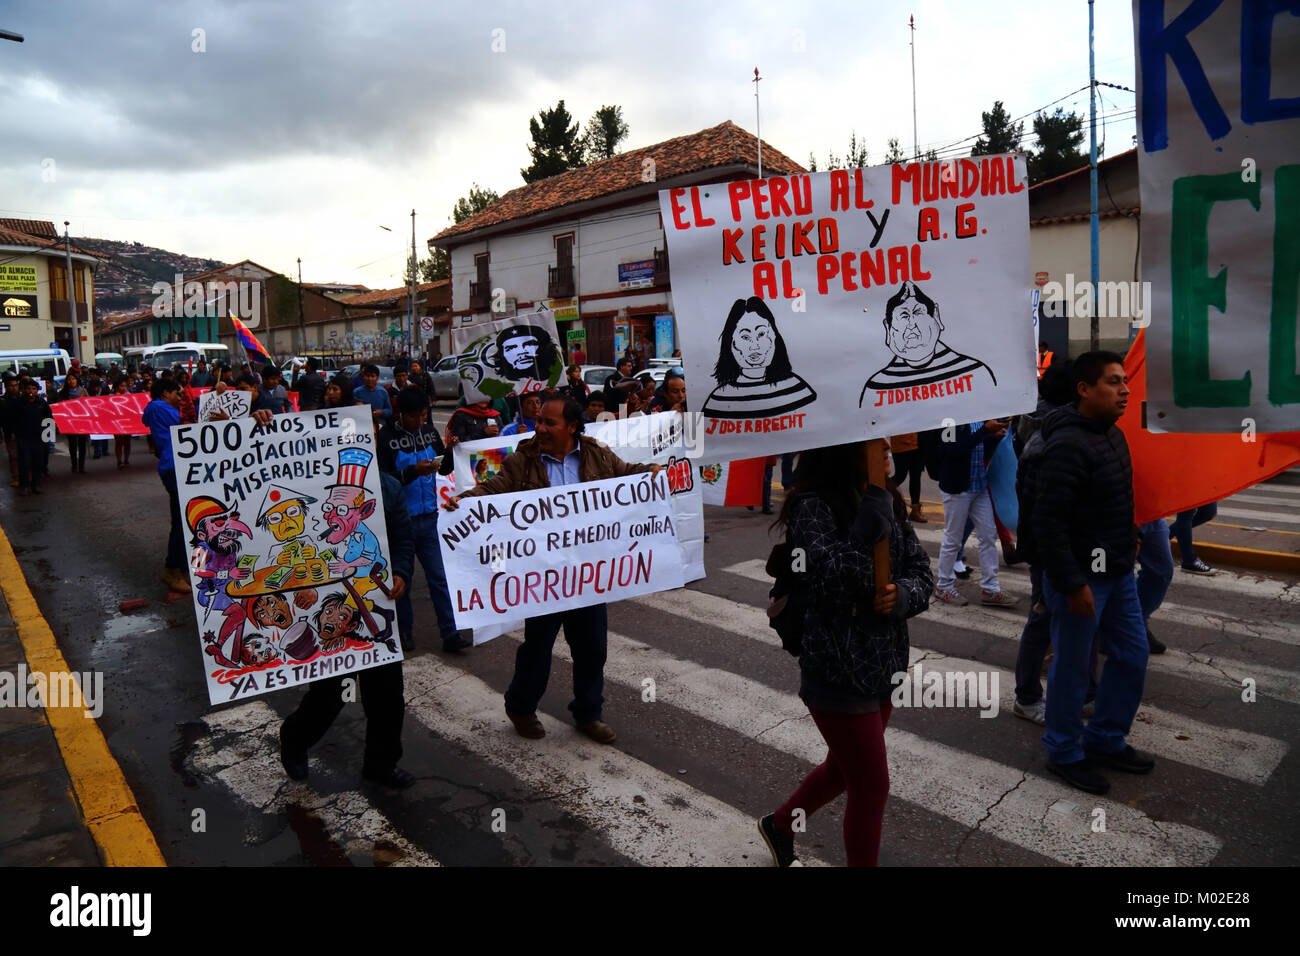 Protesters carry placards protesting against political corruption and foreign exploitation during a protest march, Cusco, Peru Stock Photo